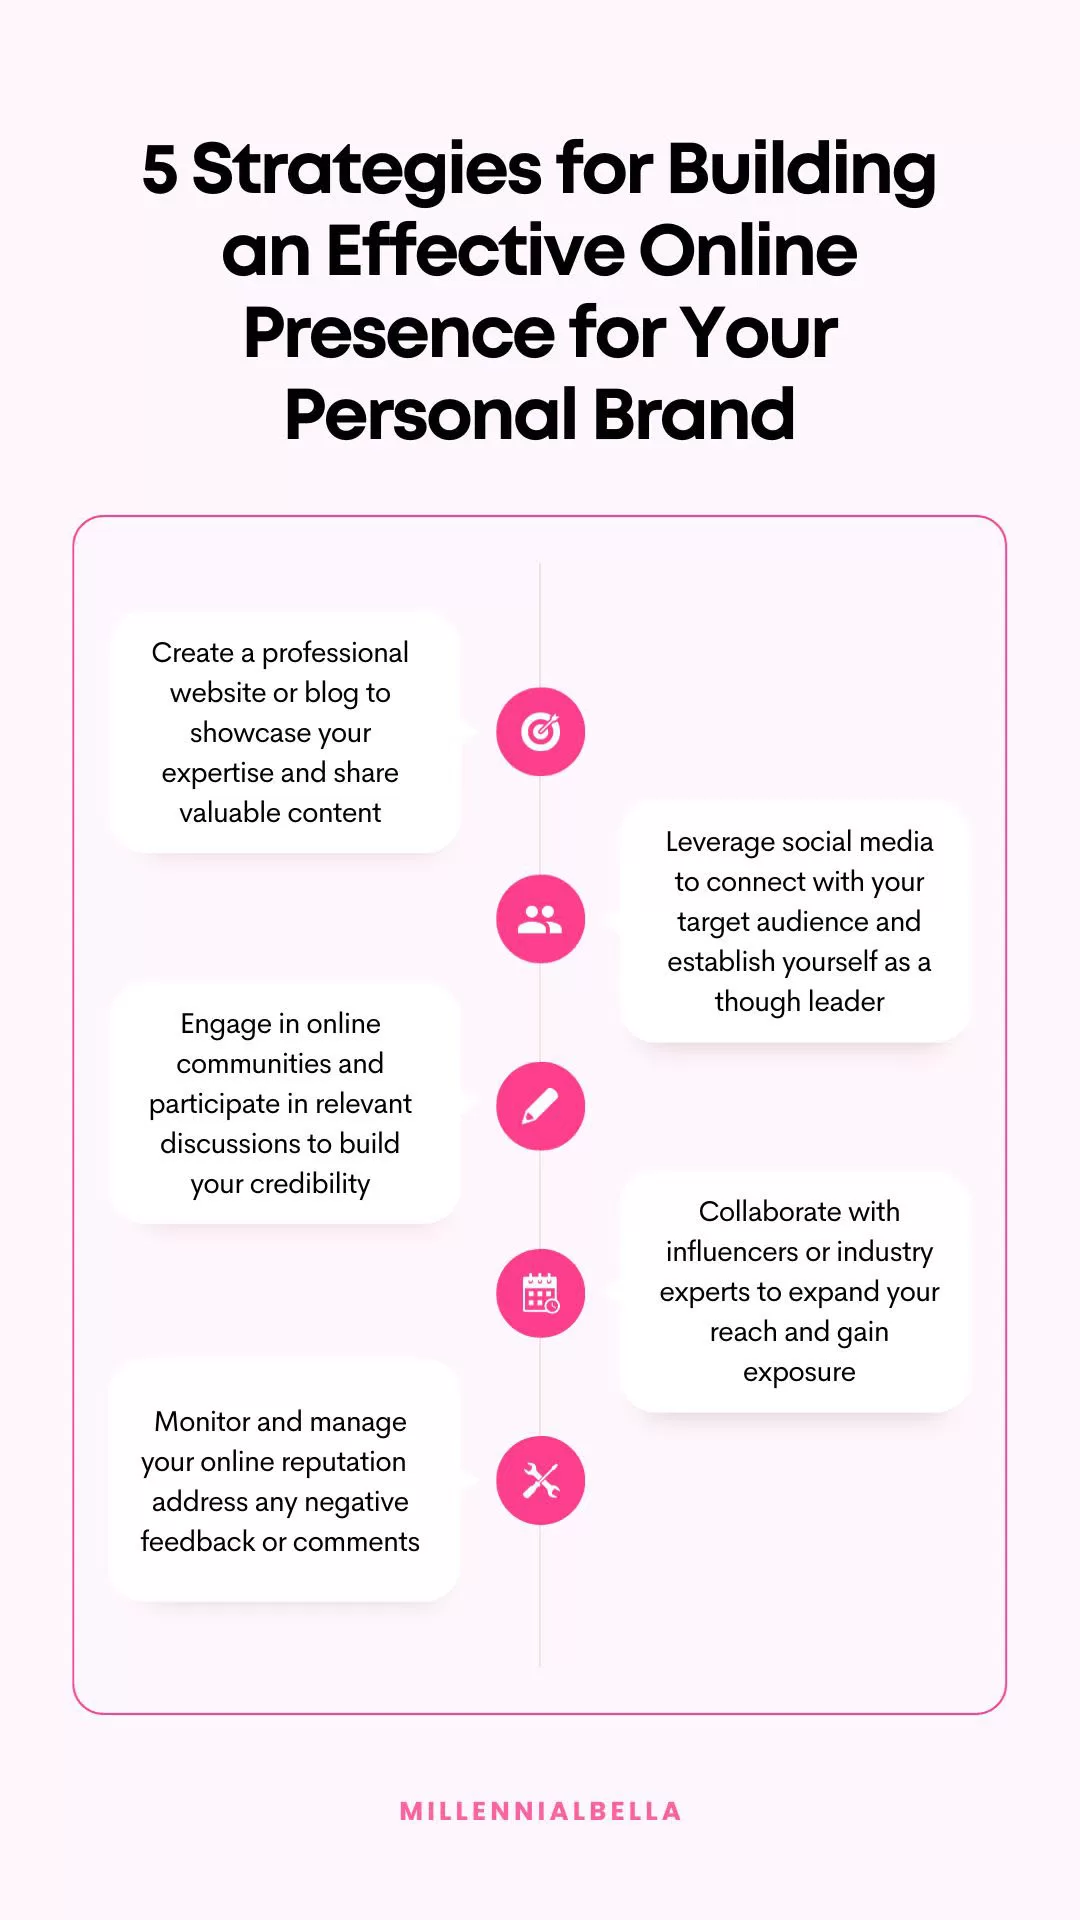 5 Strategies for Building an Effective Online Presence for Your Personal Branding Presentation